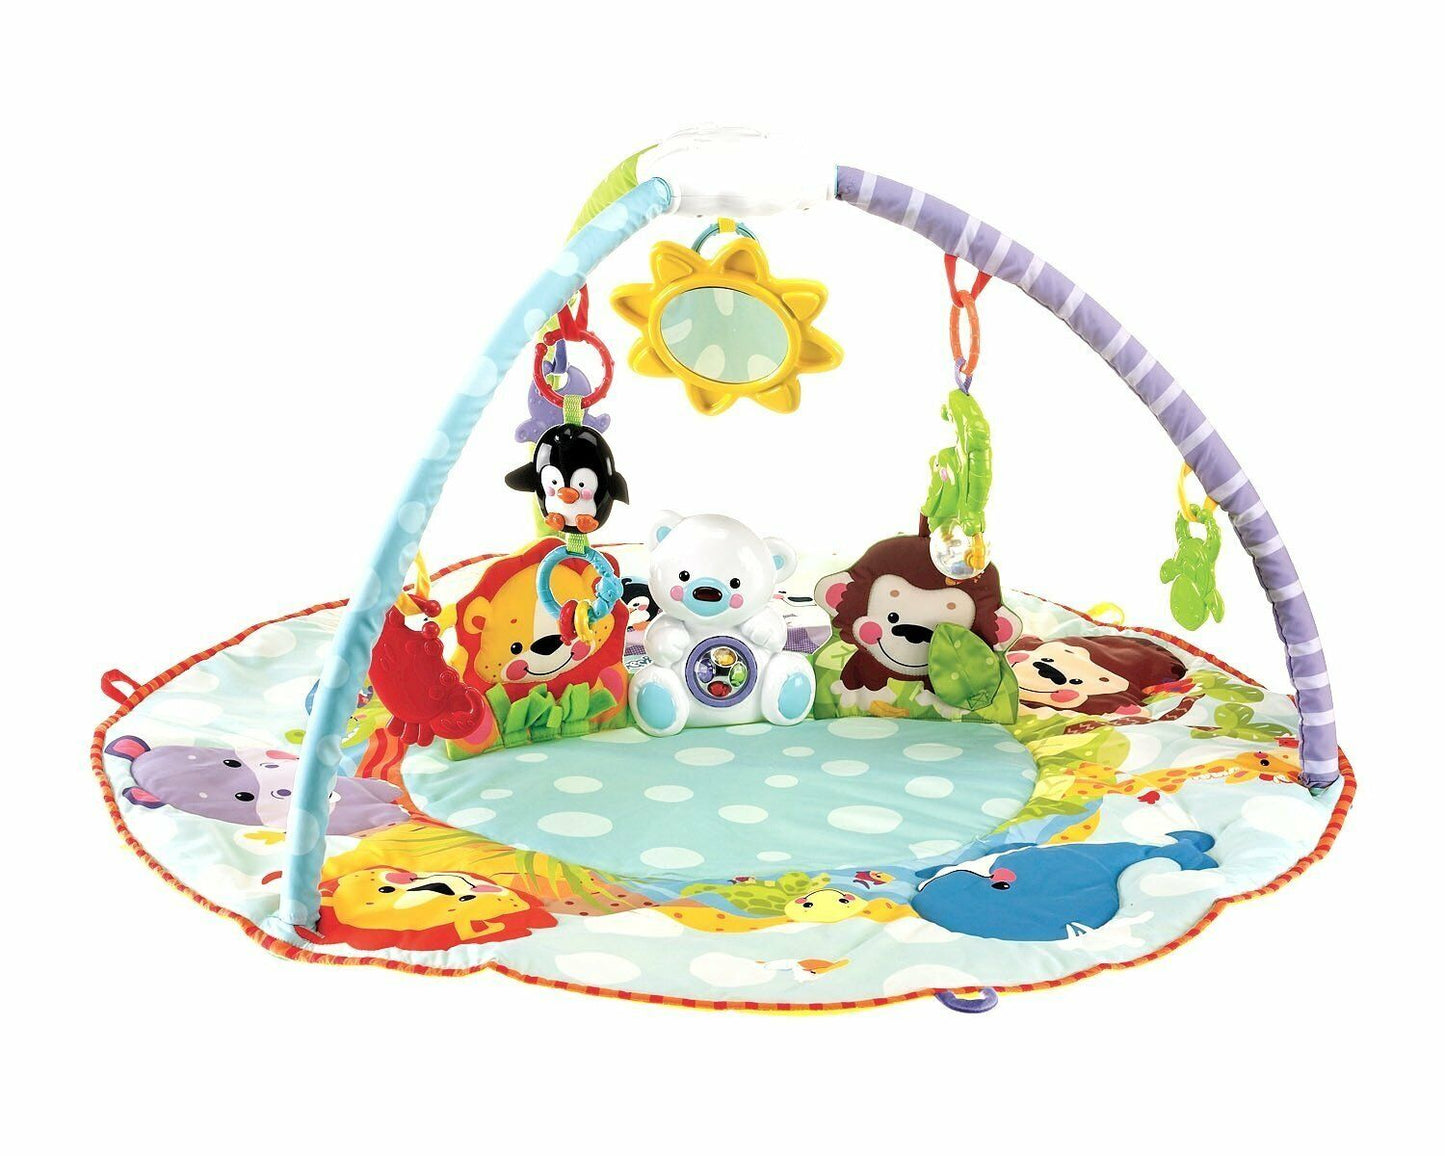 100cm Large Baby Deluxe Musical Baby Gym Play Mats Kick & Play Gym Infants Baby Toy play mat - Homeware Discounts